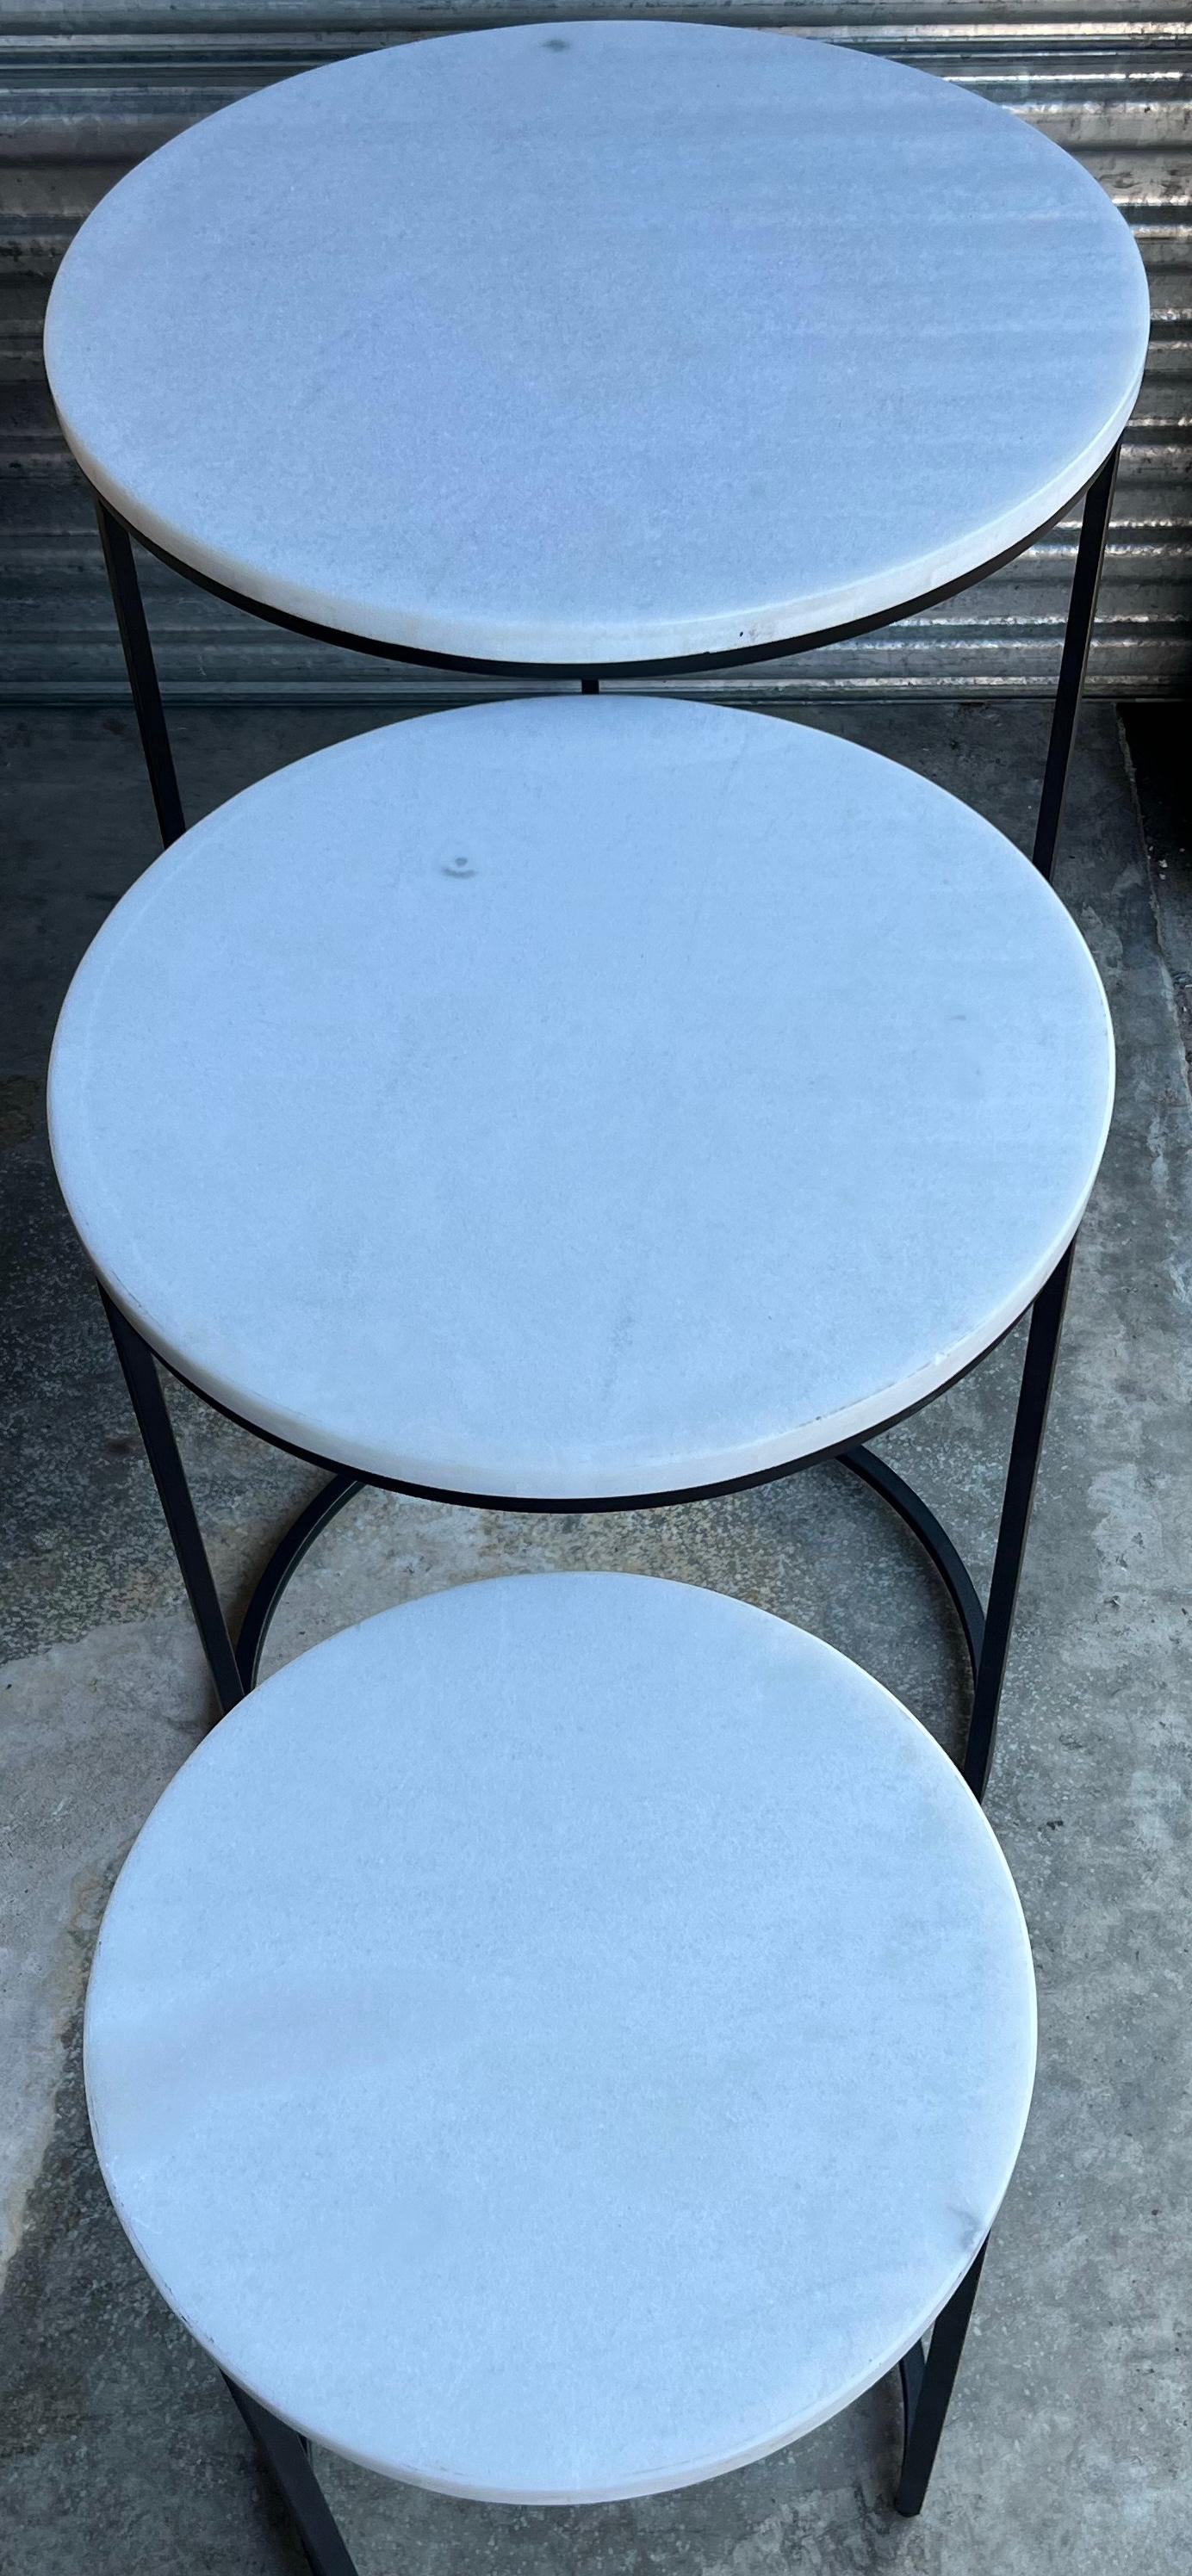 Late 20th-C. Modern Iron & Marble Nesting Tables by Mitchell Gold & Bob William In Good Condition For Sale In Kennesaw, GA